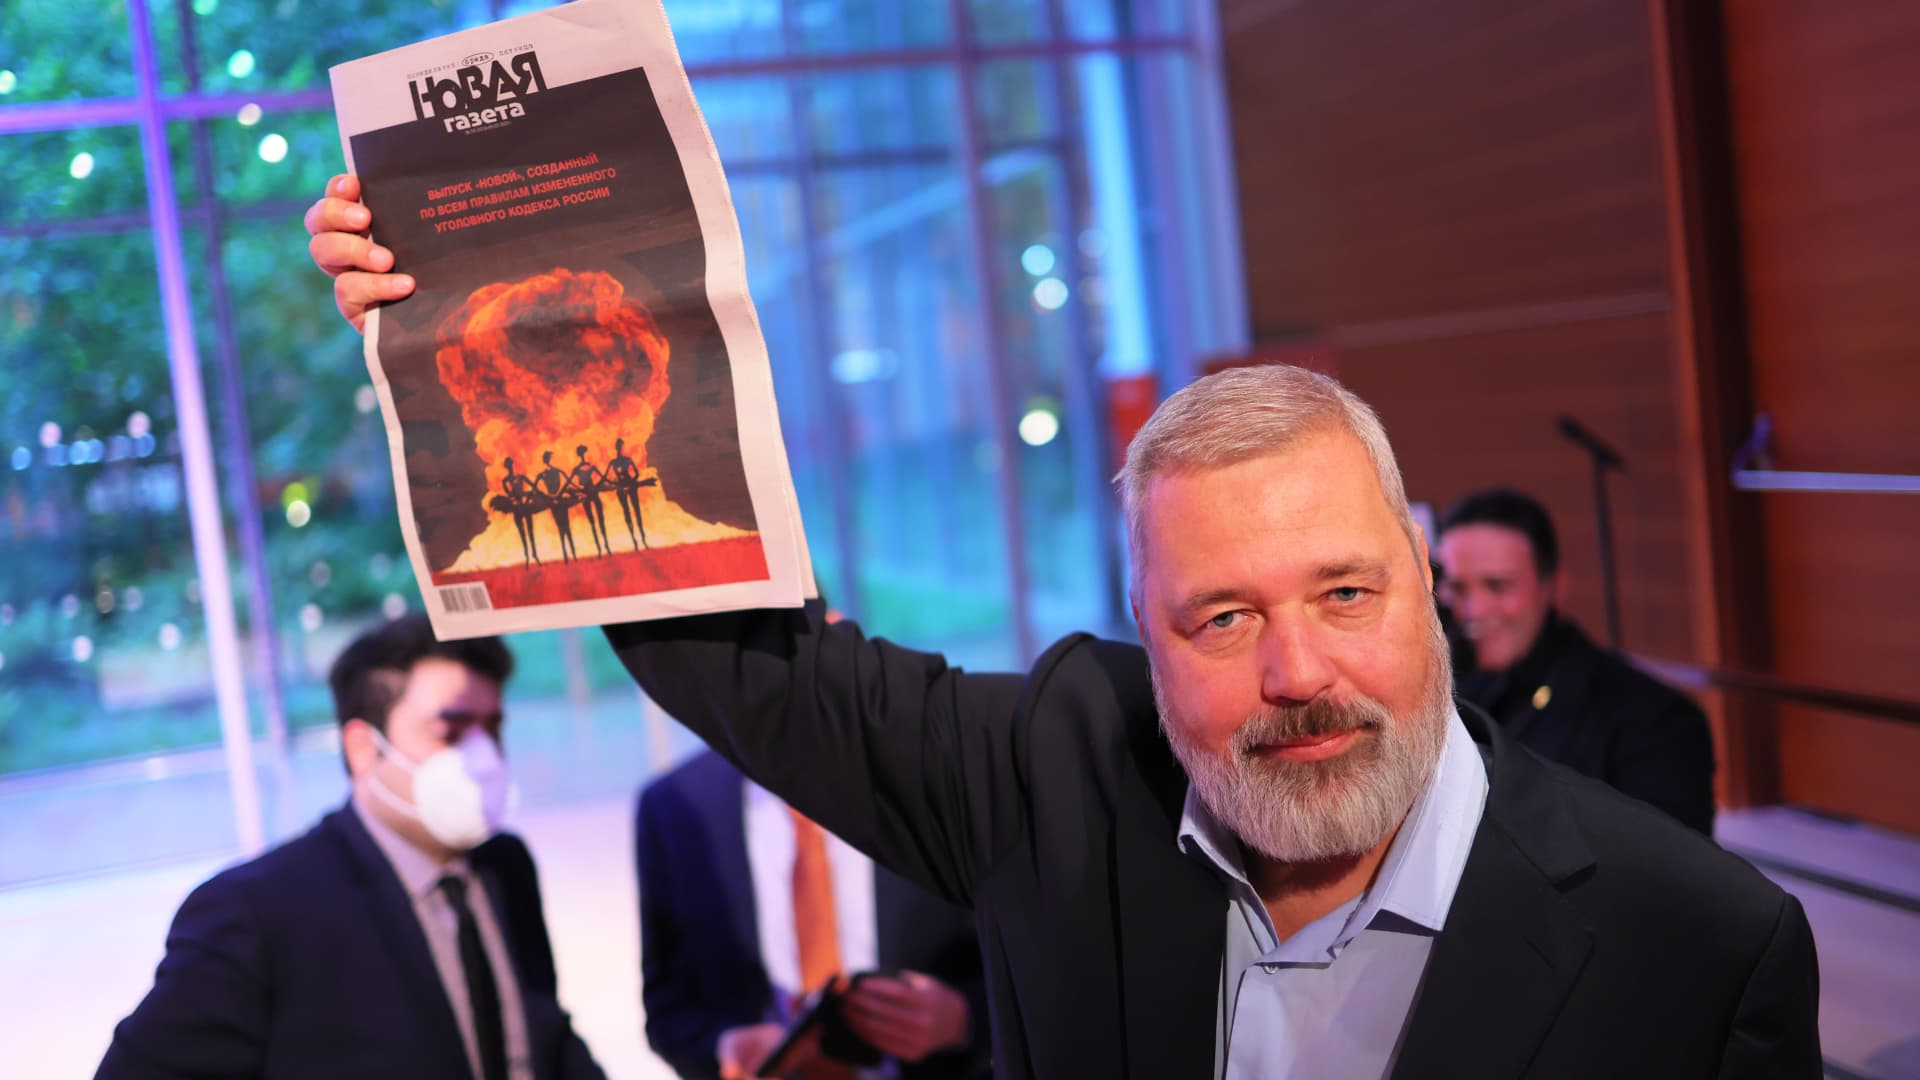 Nobel Peace Prize winner Dmitry Muratov, editor-in-chief of the Russian newspaper Novaya Gazeta, holds up a copy of his paper after the conclusion of bidding during a charity auction at The Times Center on June 20, 2022 in New York City.